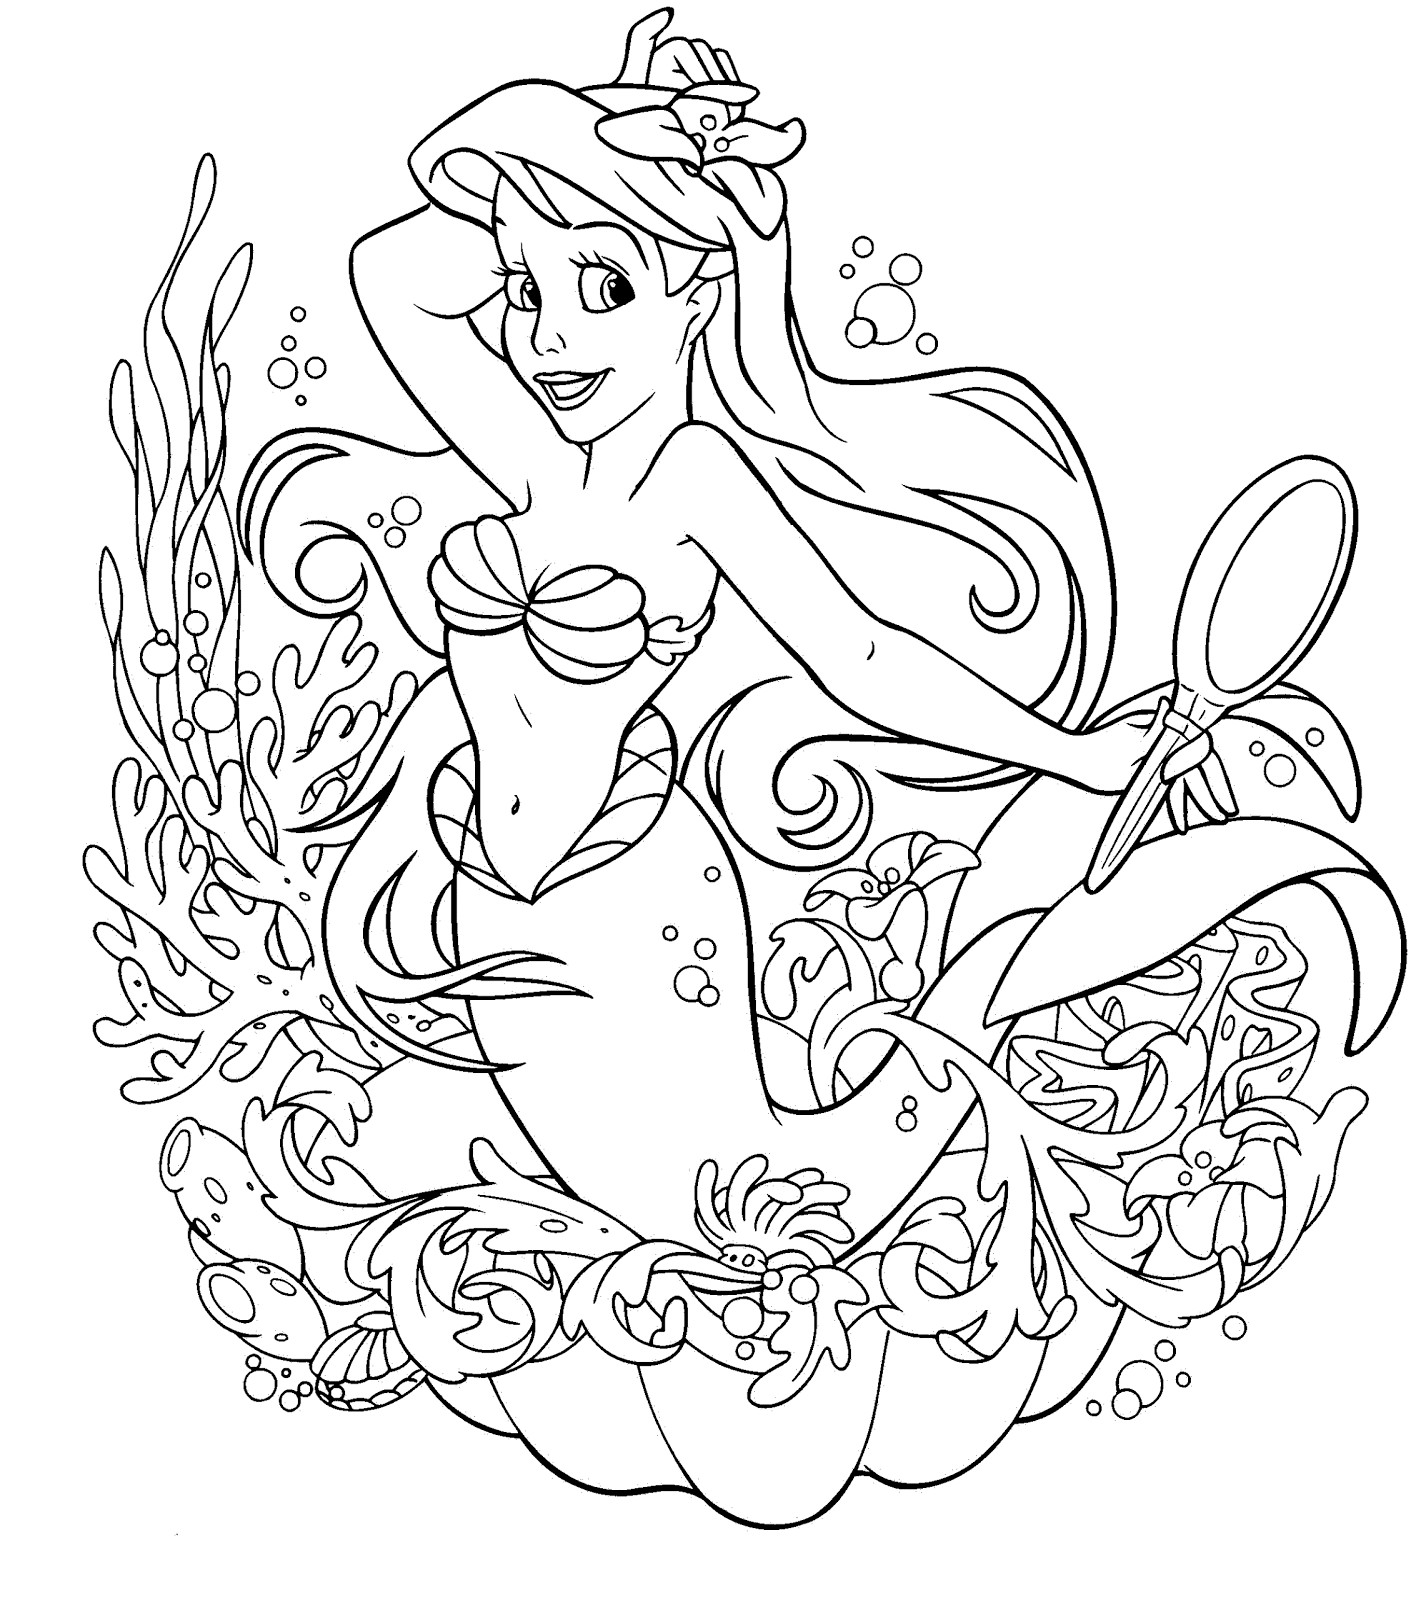 Coloring Pages For Kids Mermaid
 Mermaid Birthday Party Coloring Pages